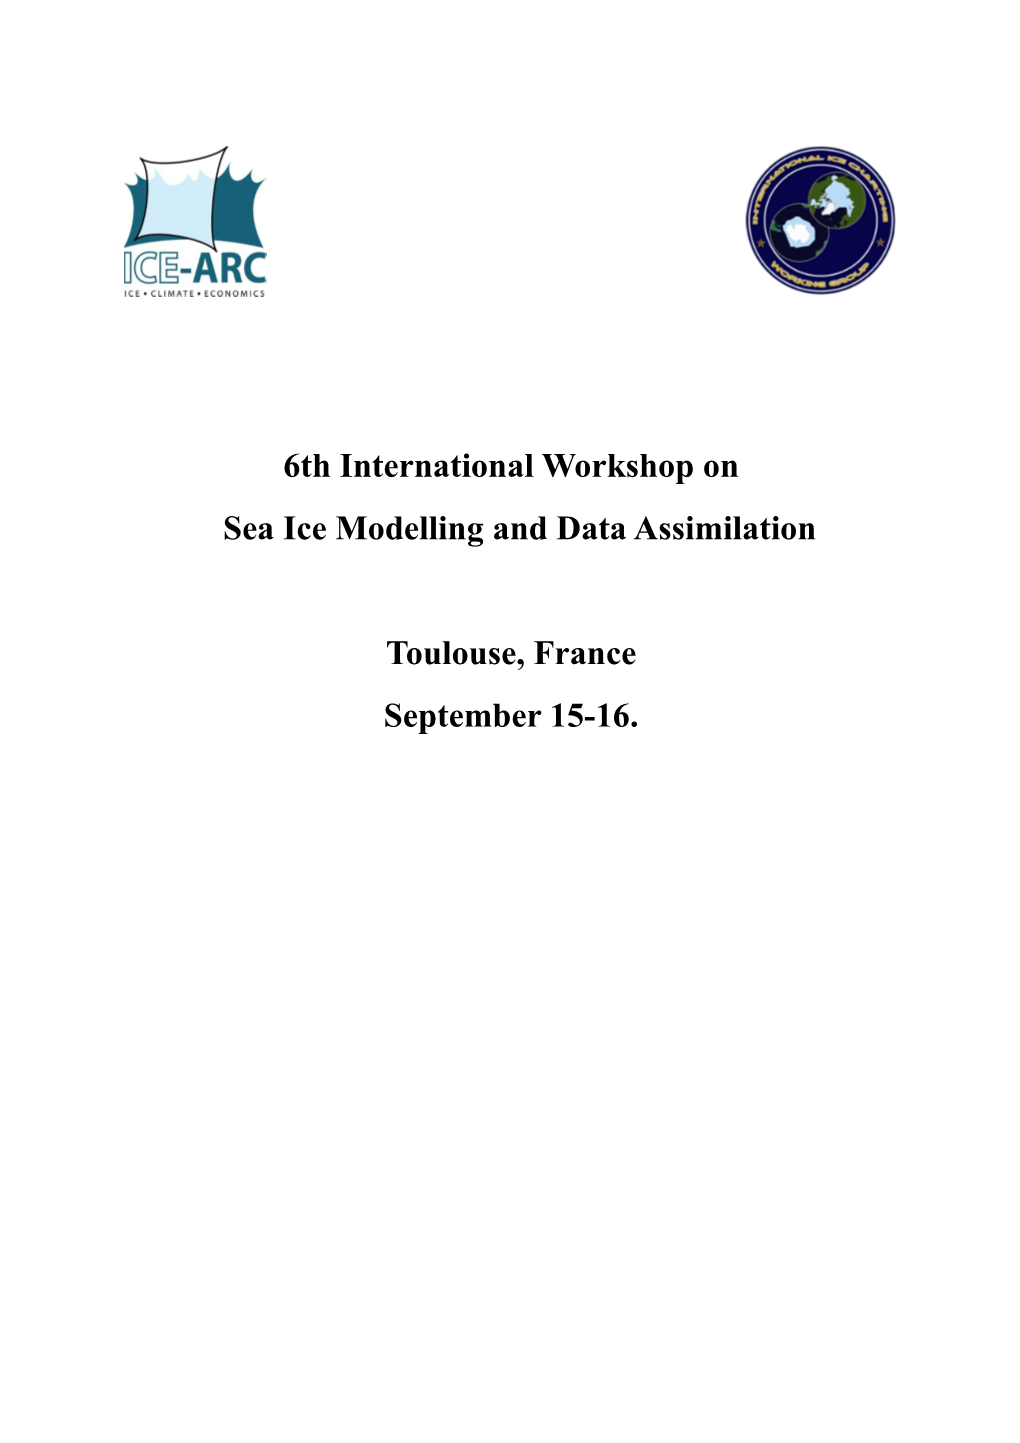 6Th International Workshop on Sea Ice Modelling and Data Assimilation